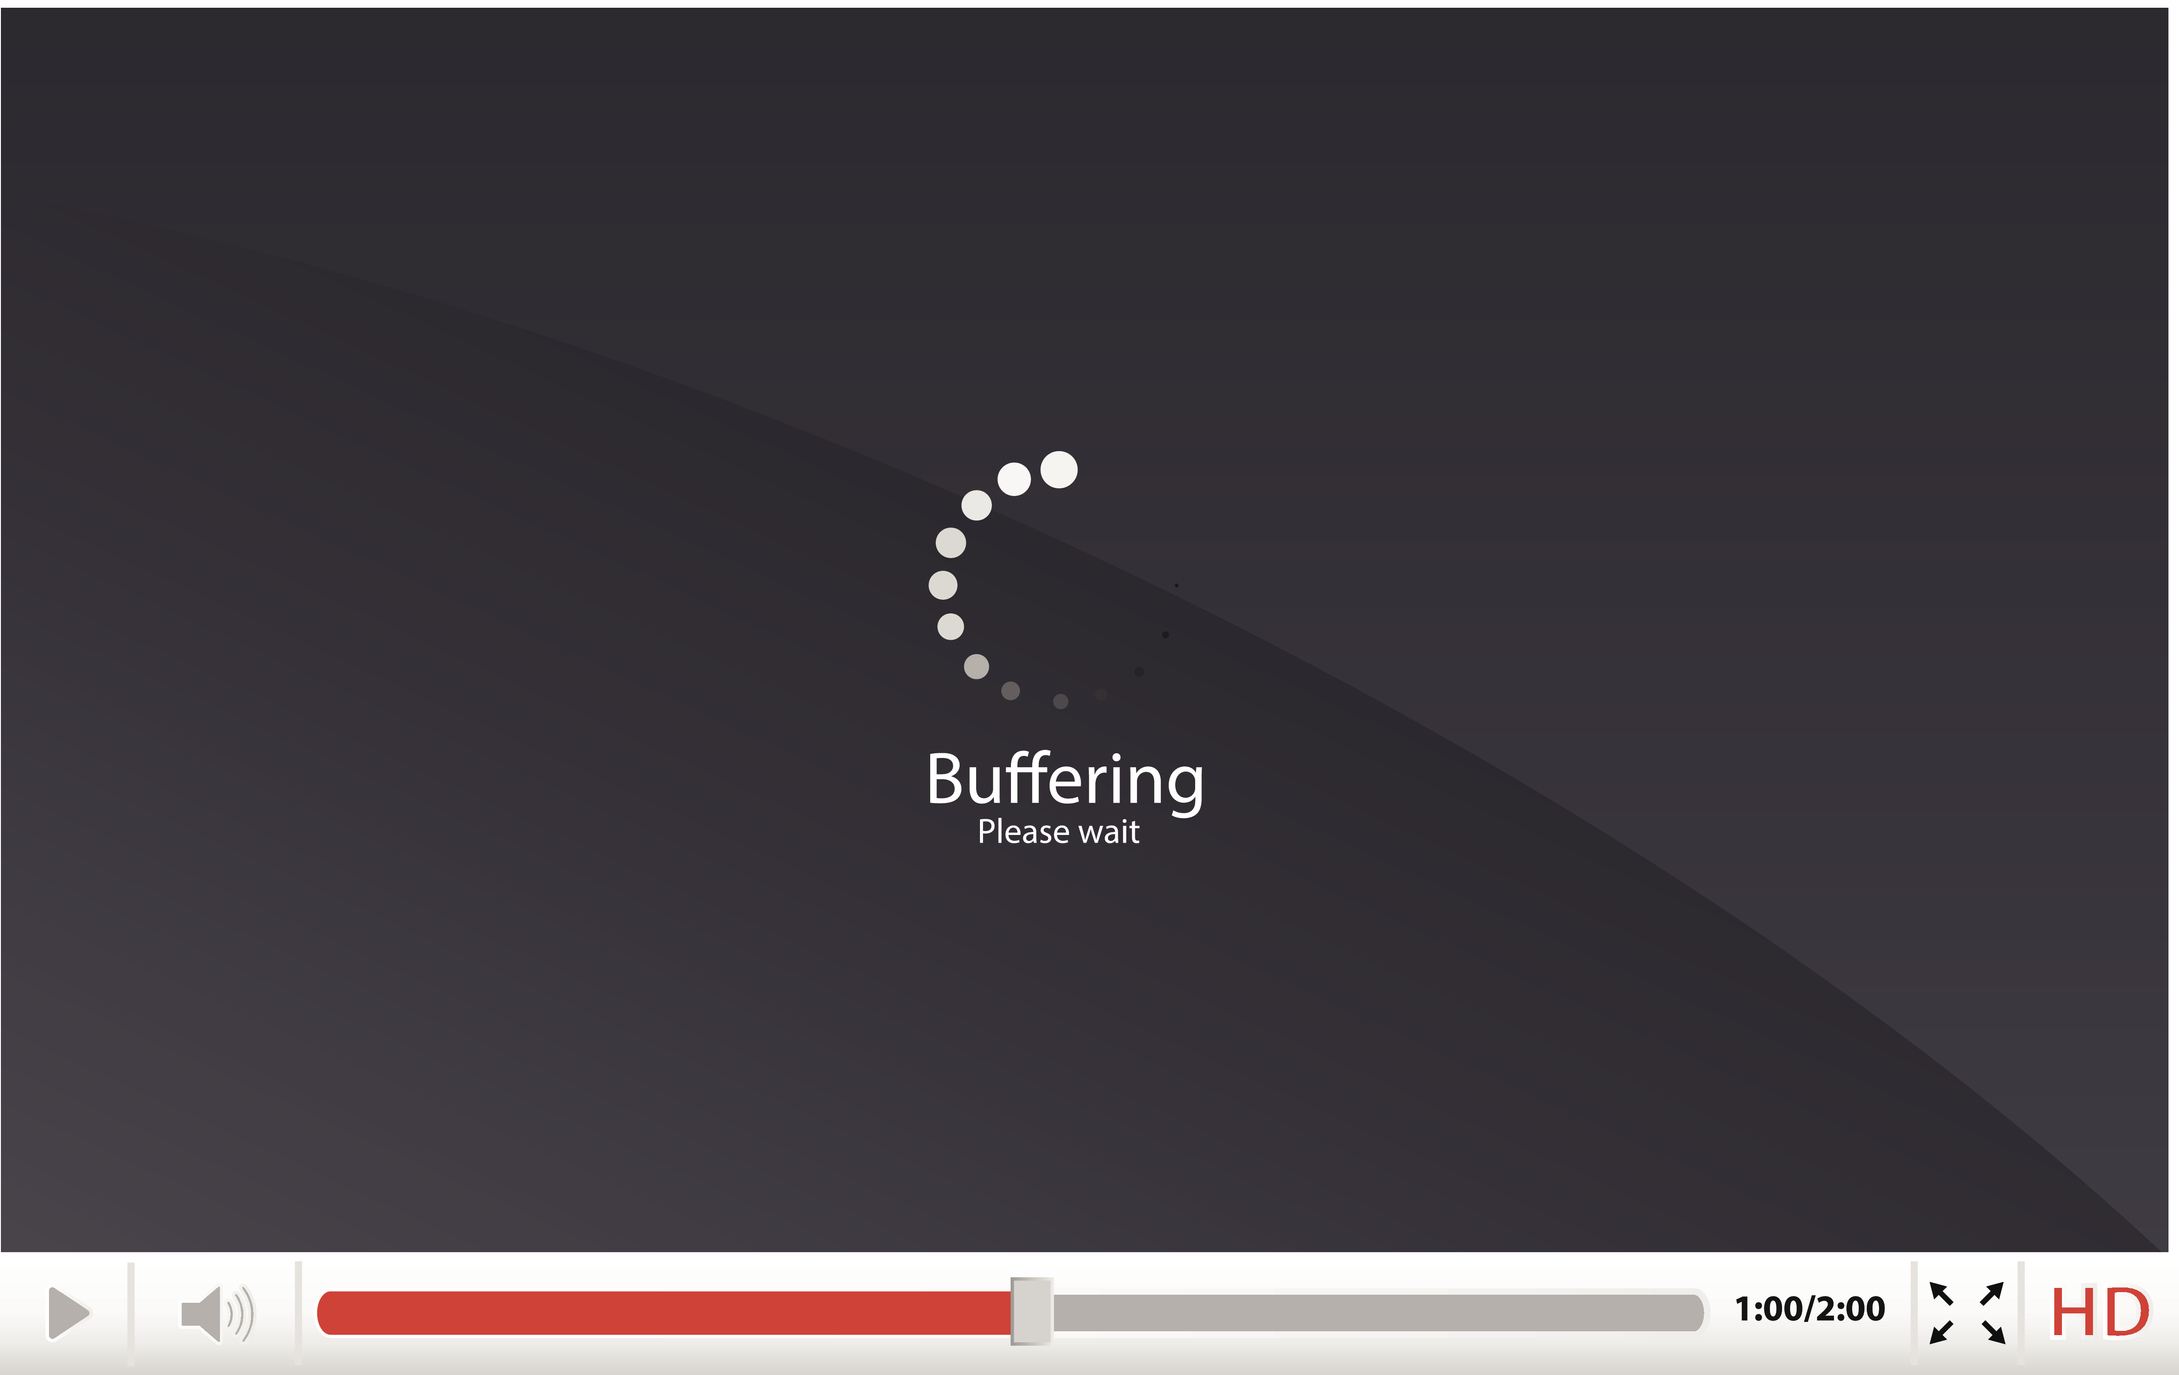 Example of network jitter, video buffering